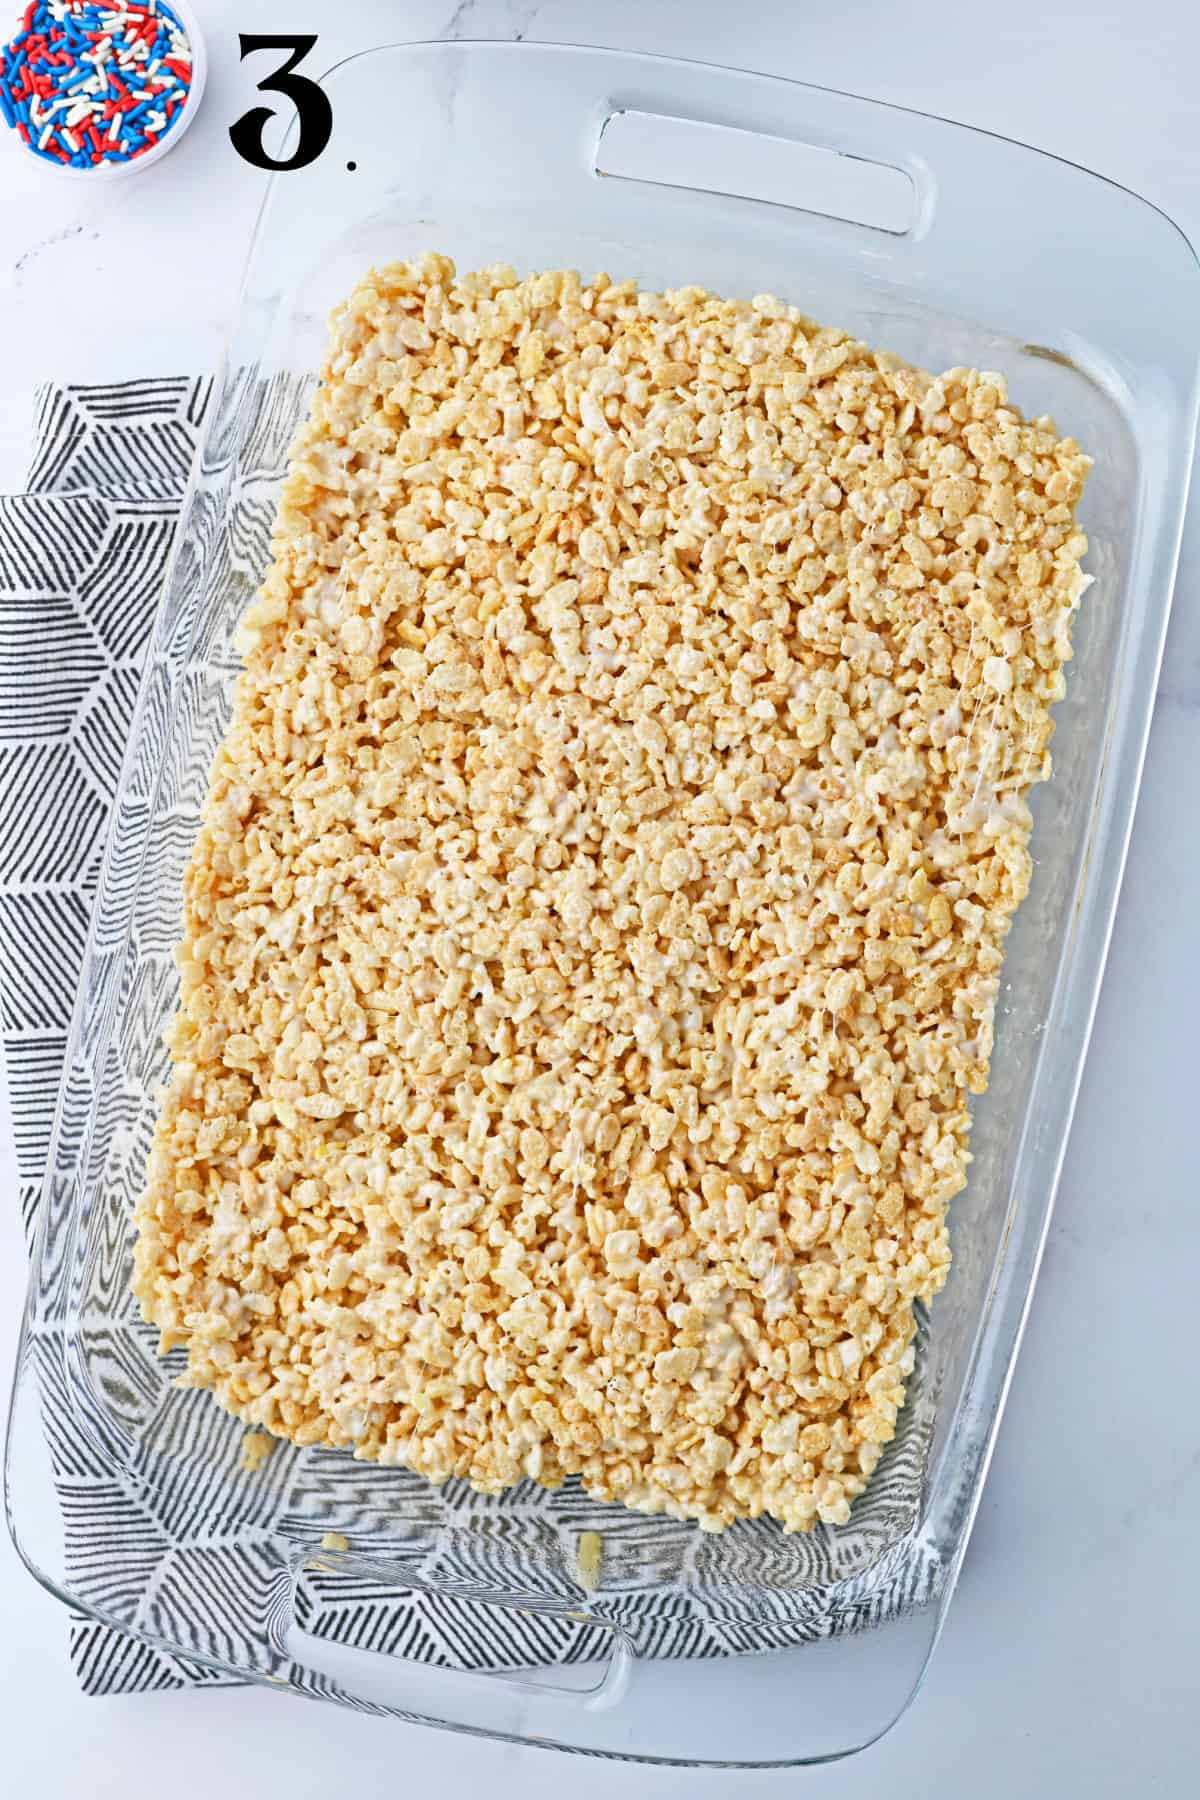 How to Make 4th of July Rice Krispie Treats - Step 3.